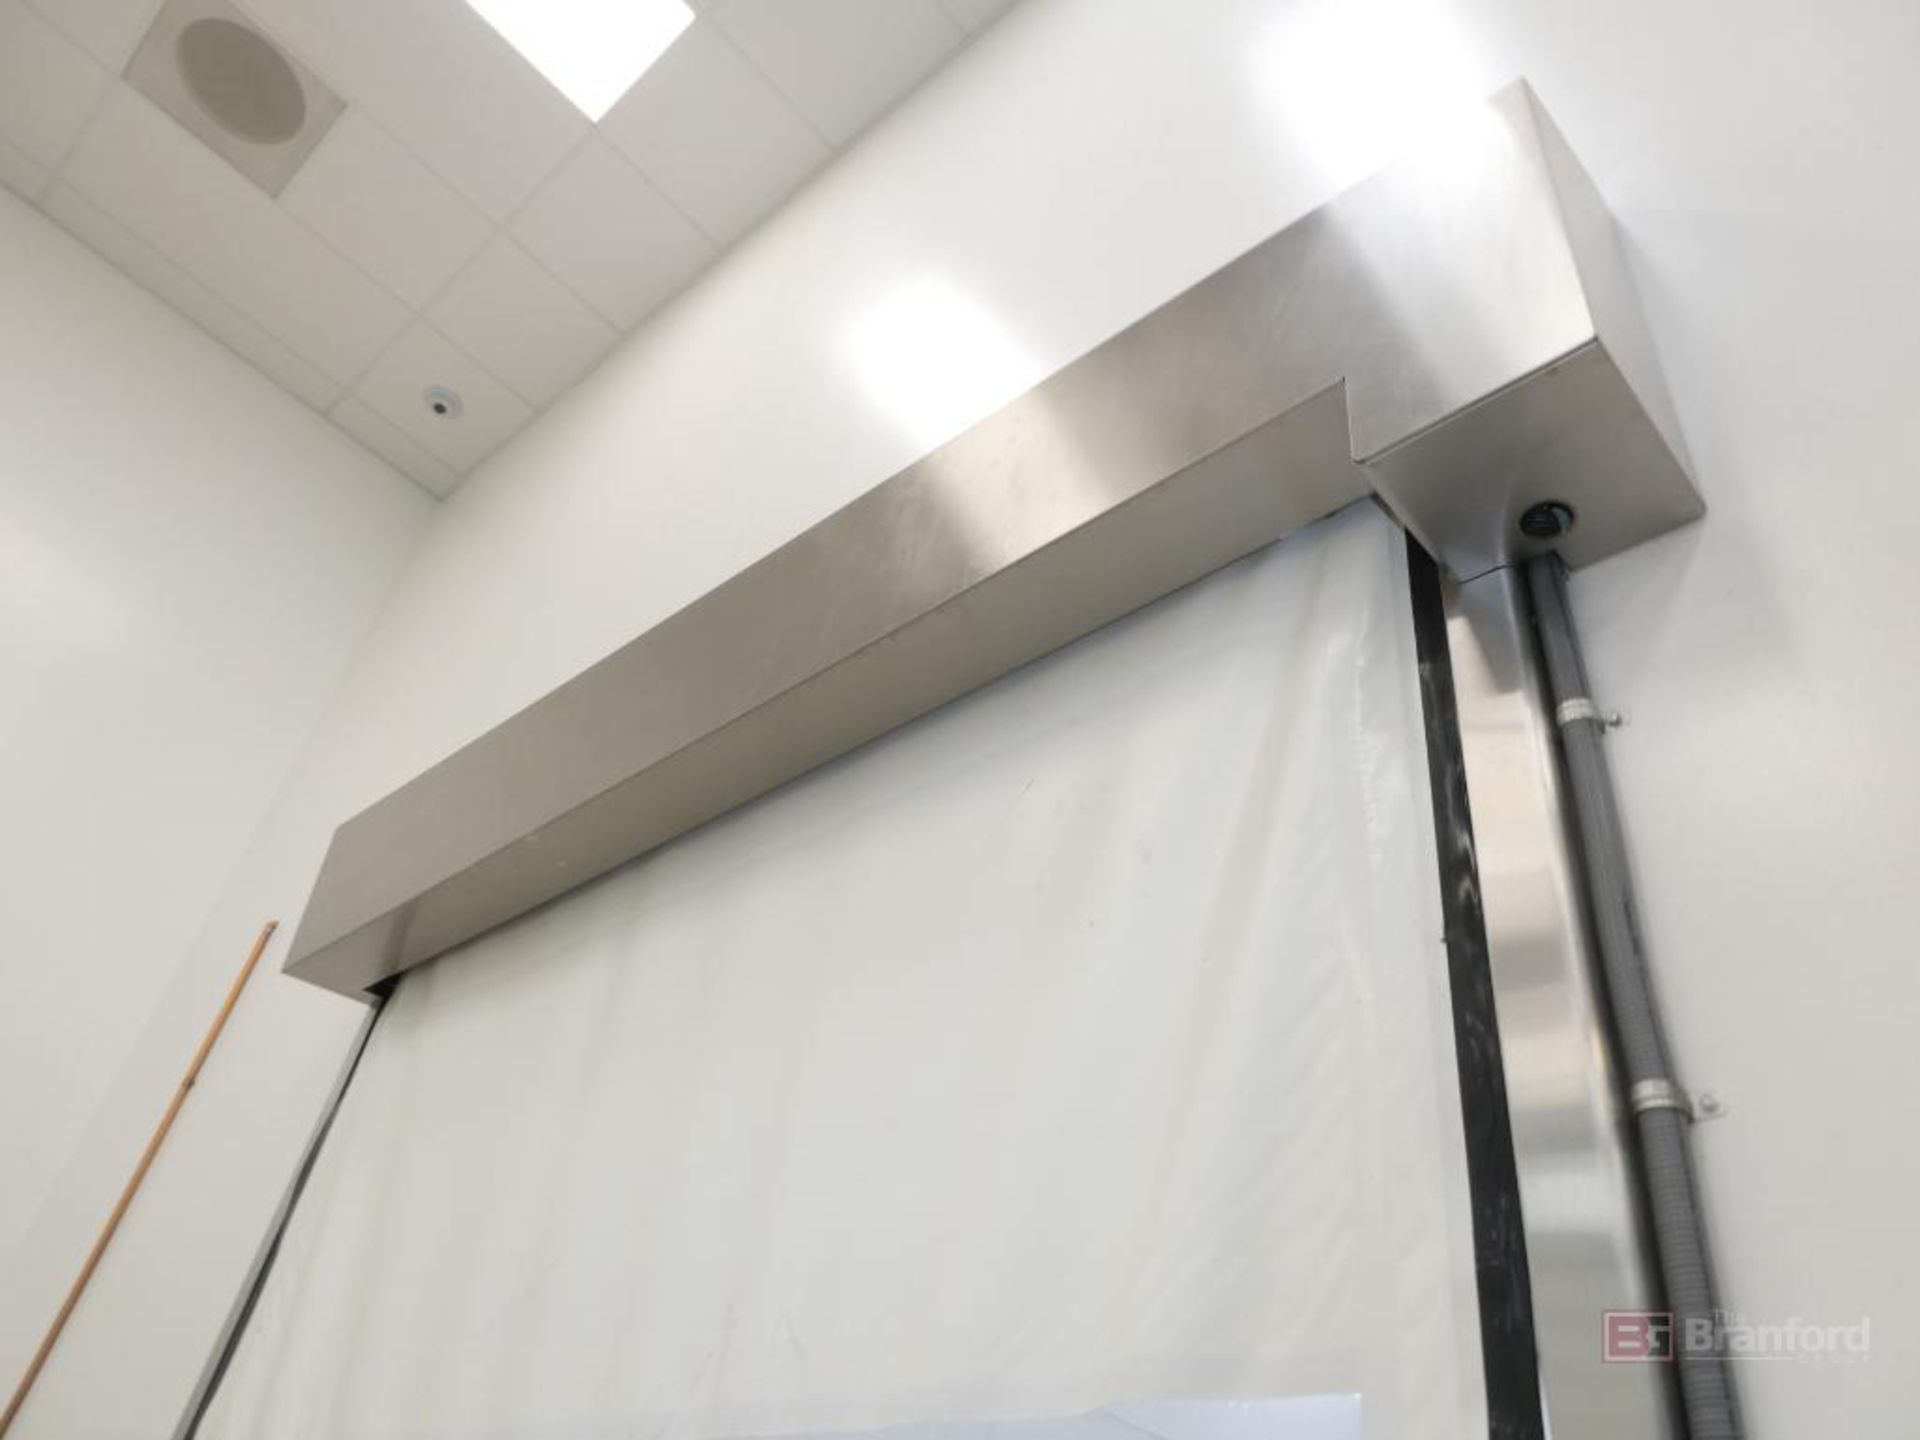 Automatic High Speed Roll Up Doors - Image 3 of 4